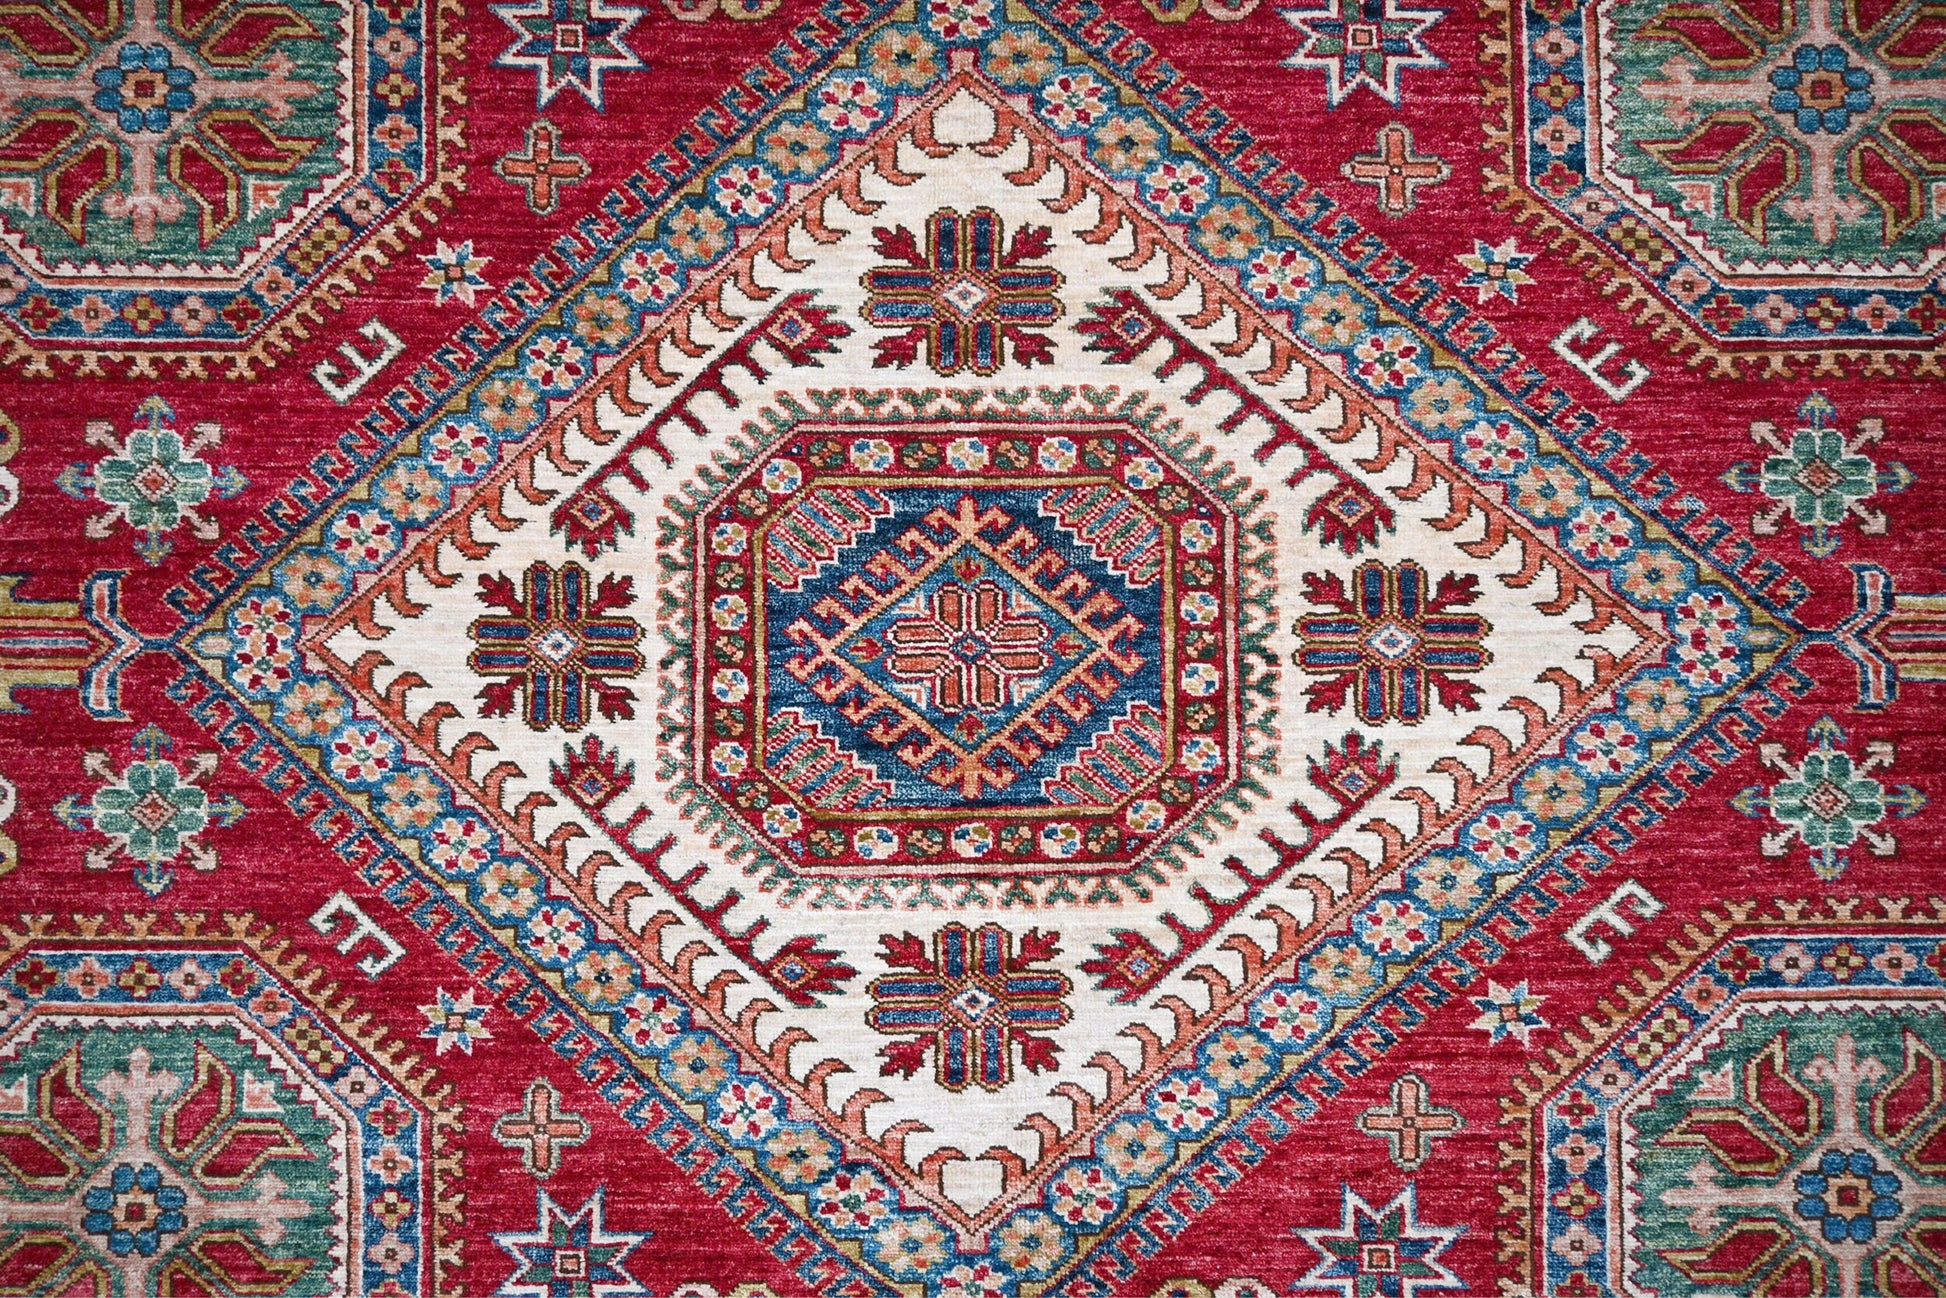 Kazakh Wool Carpet | 14'2" x 10' | Home Decor | Hand-Knotted Rug